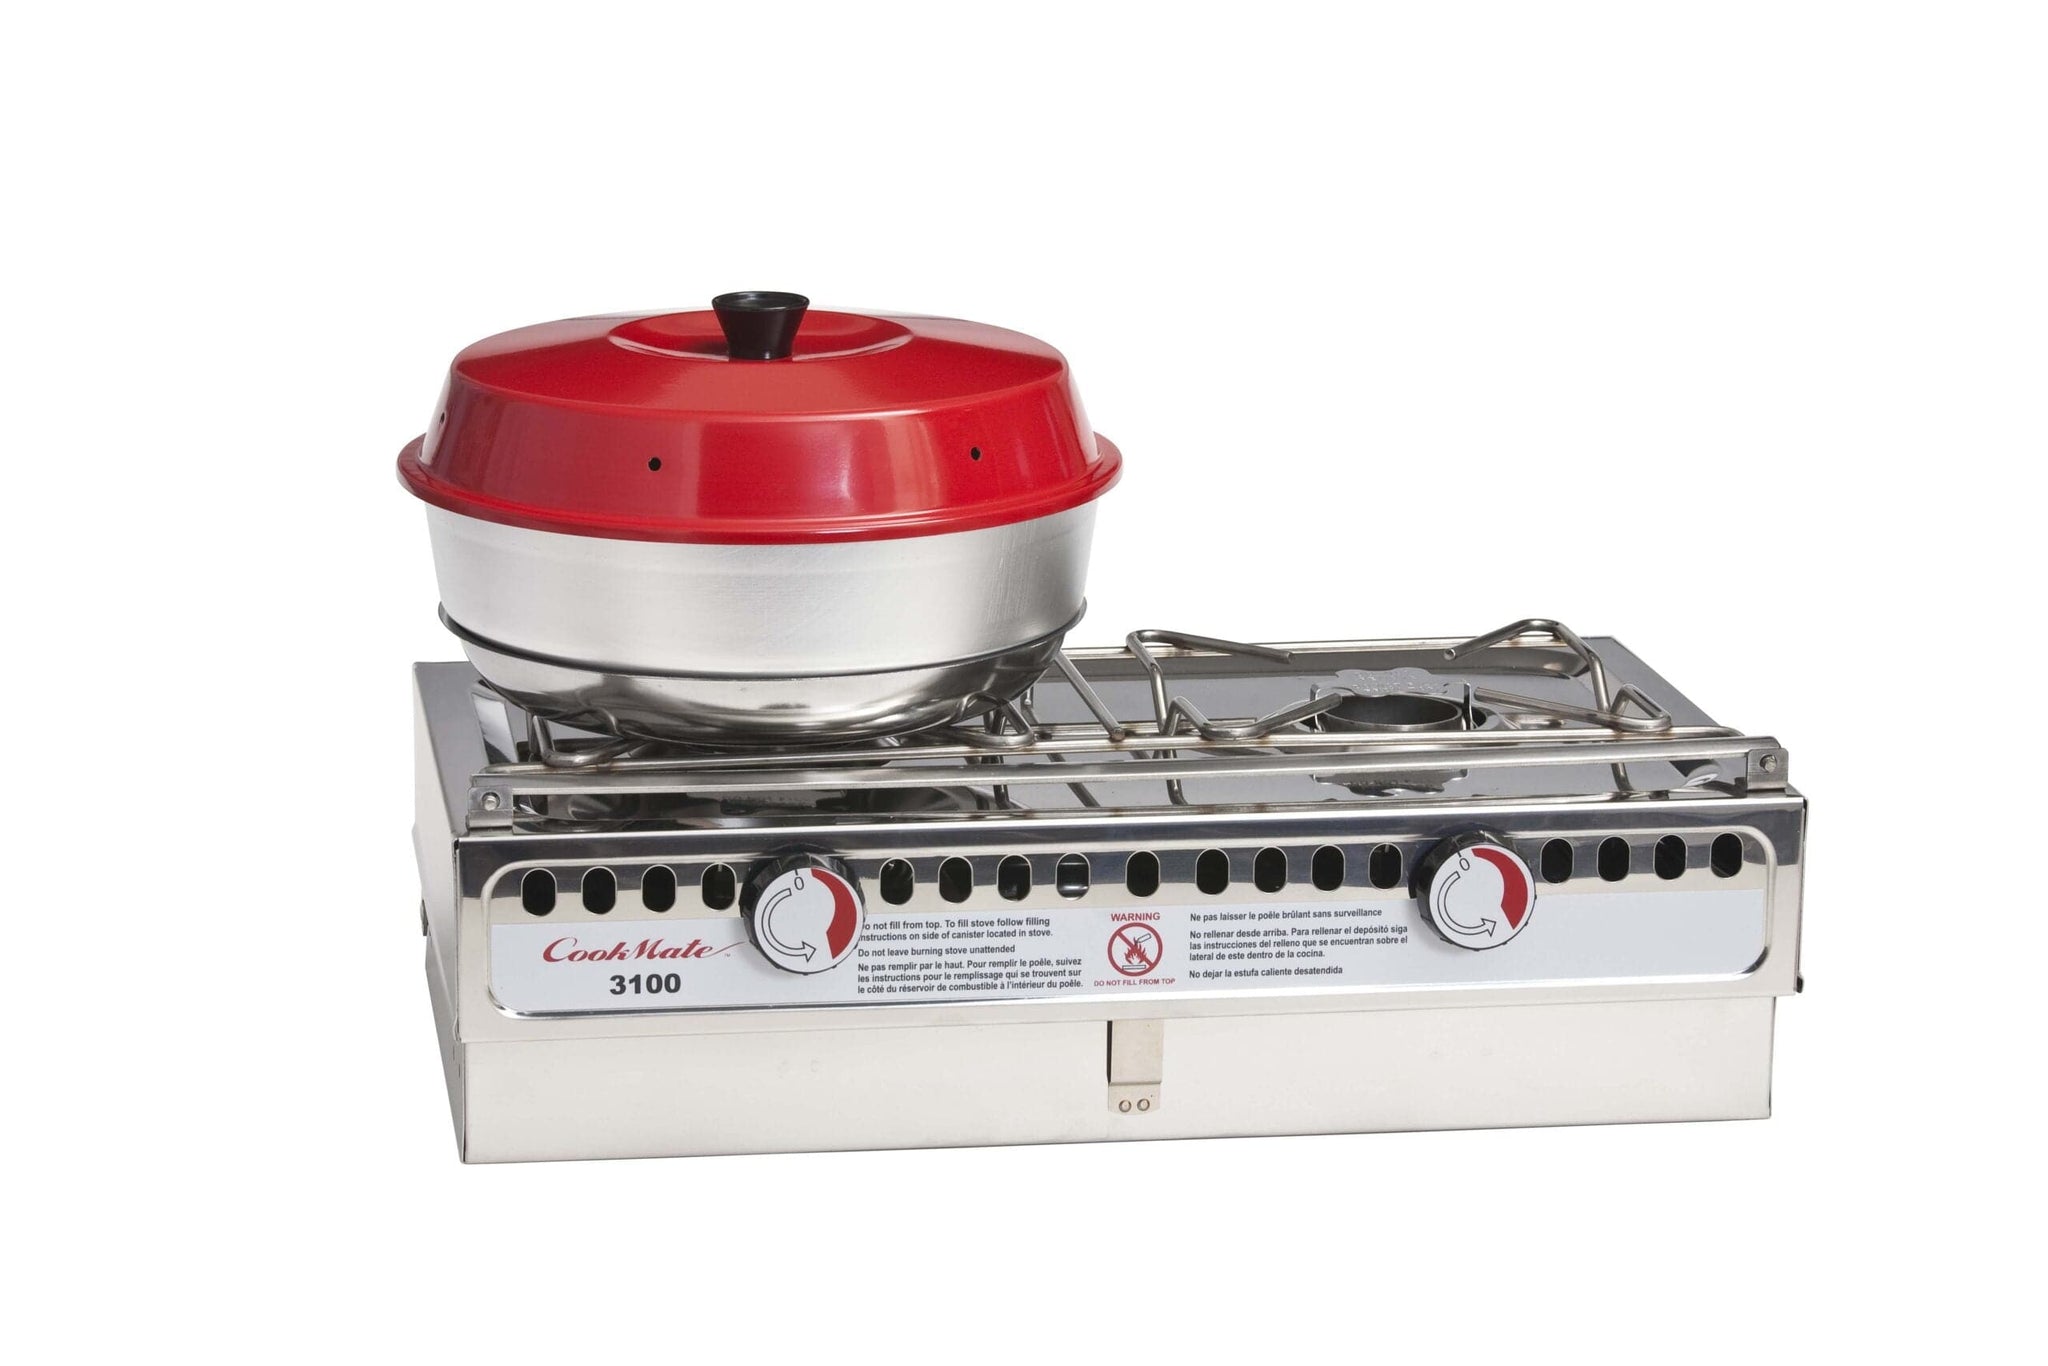 Omnia Stove Top Portable Camping Oven